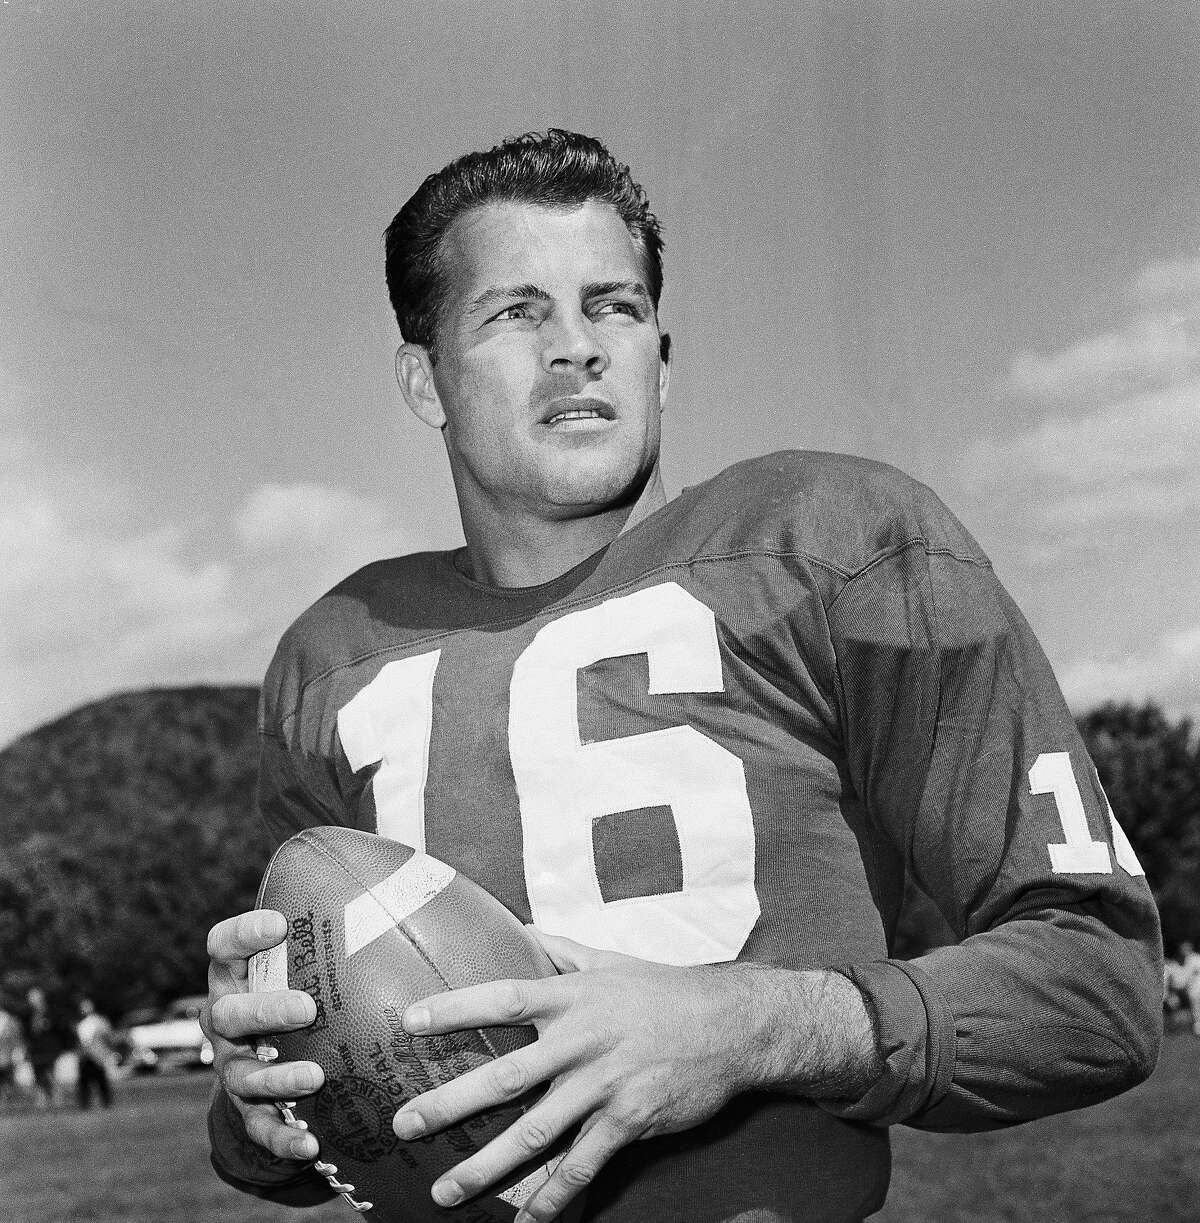 FILE - In this Sept. 9, 1958 file photo, New York Giants halfback Frank Gifford participates in a workout in New York. Gifford, a running back, defensive back, wide receiver and special teams player, played in five NFL title games and was the league's MVP in 1956, died Sunday, Aug. 9, 2015. He was 84. (AP Photo/John Rooney, File)